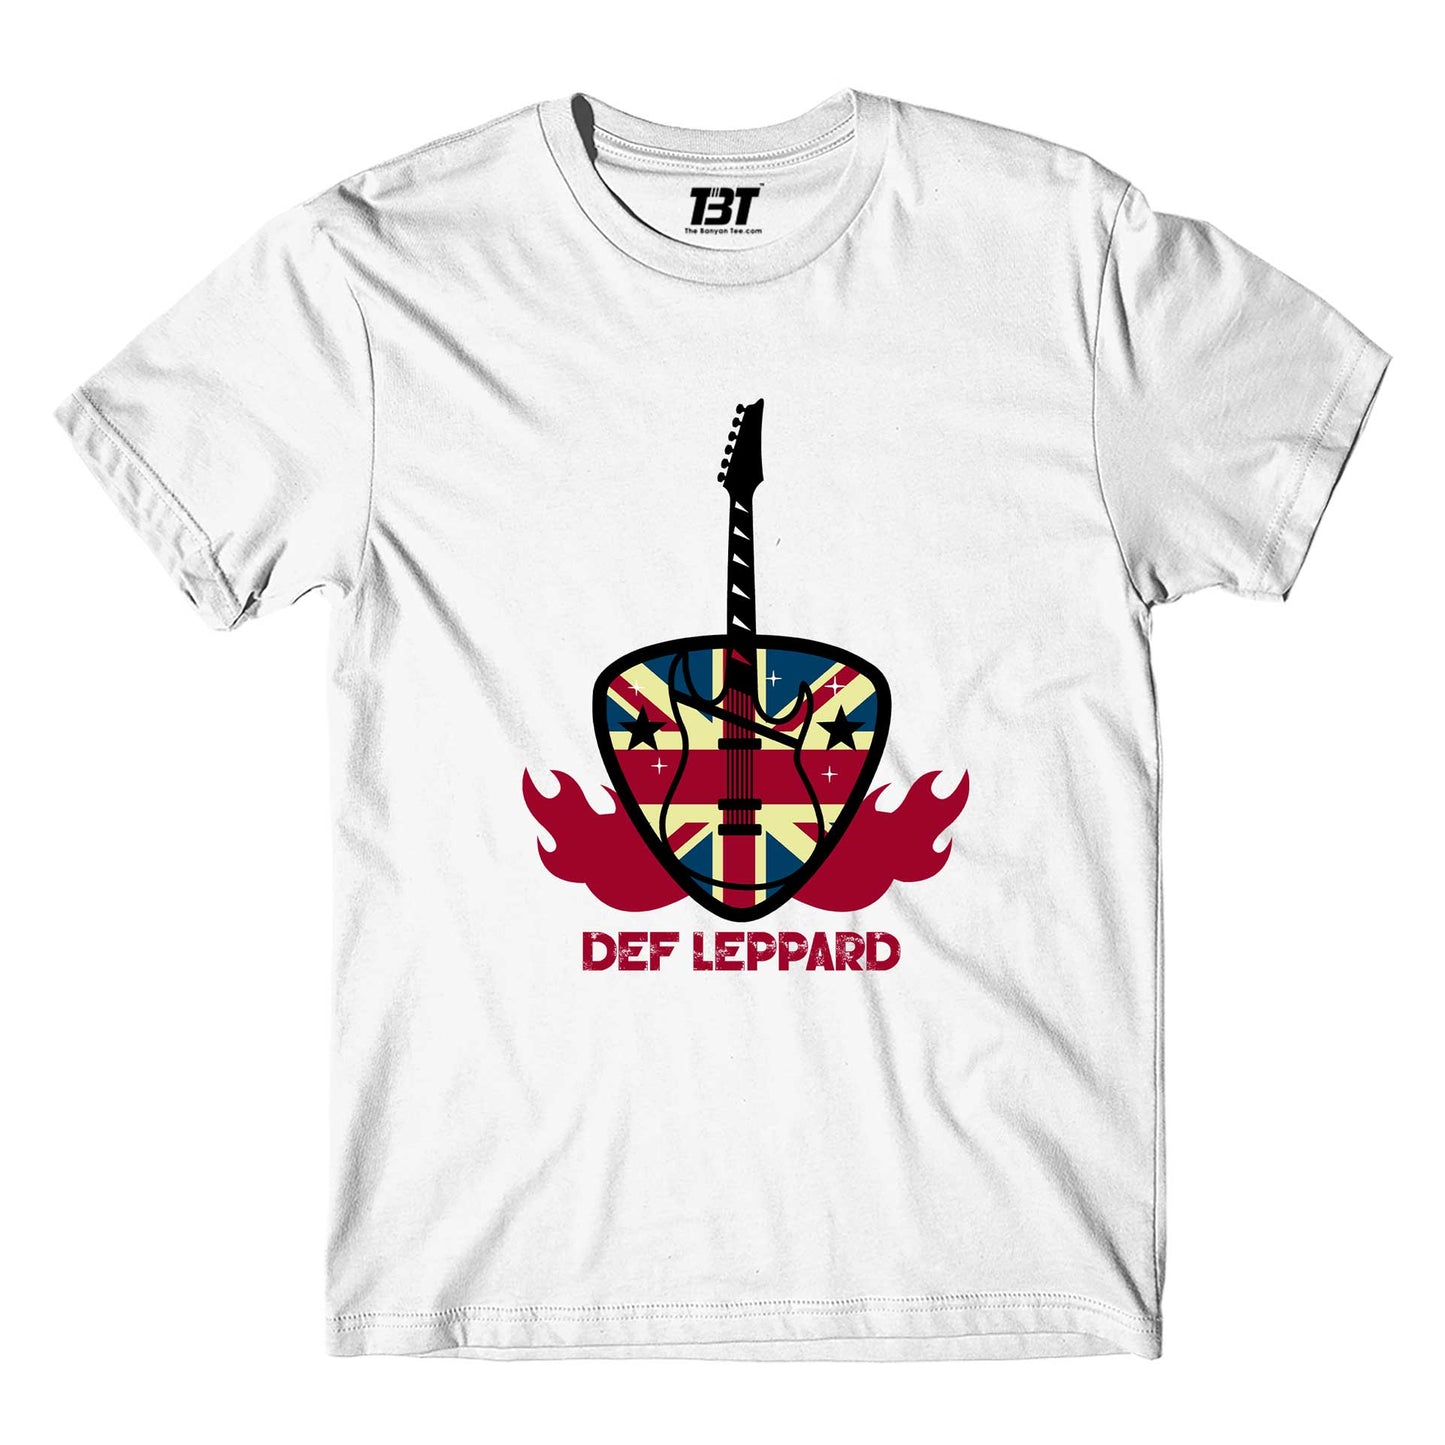 the banyan tee merch on sale Def Leppard T shirt - On Sale - M (Chest size 40 IN)